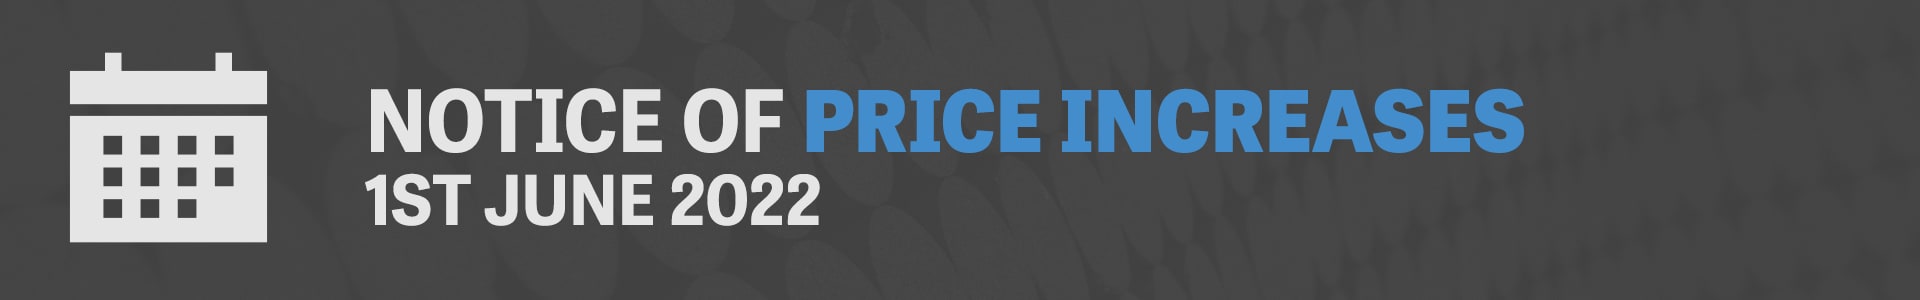 Notice of Price Increases 1st June 2022